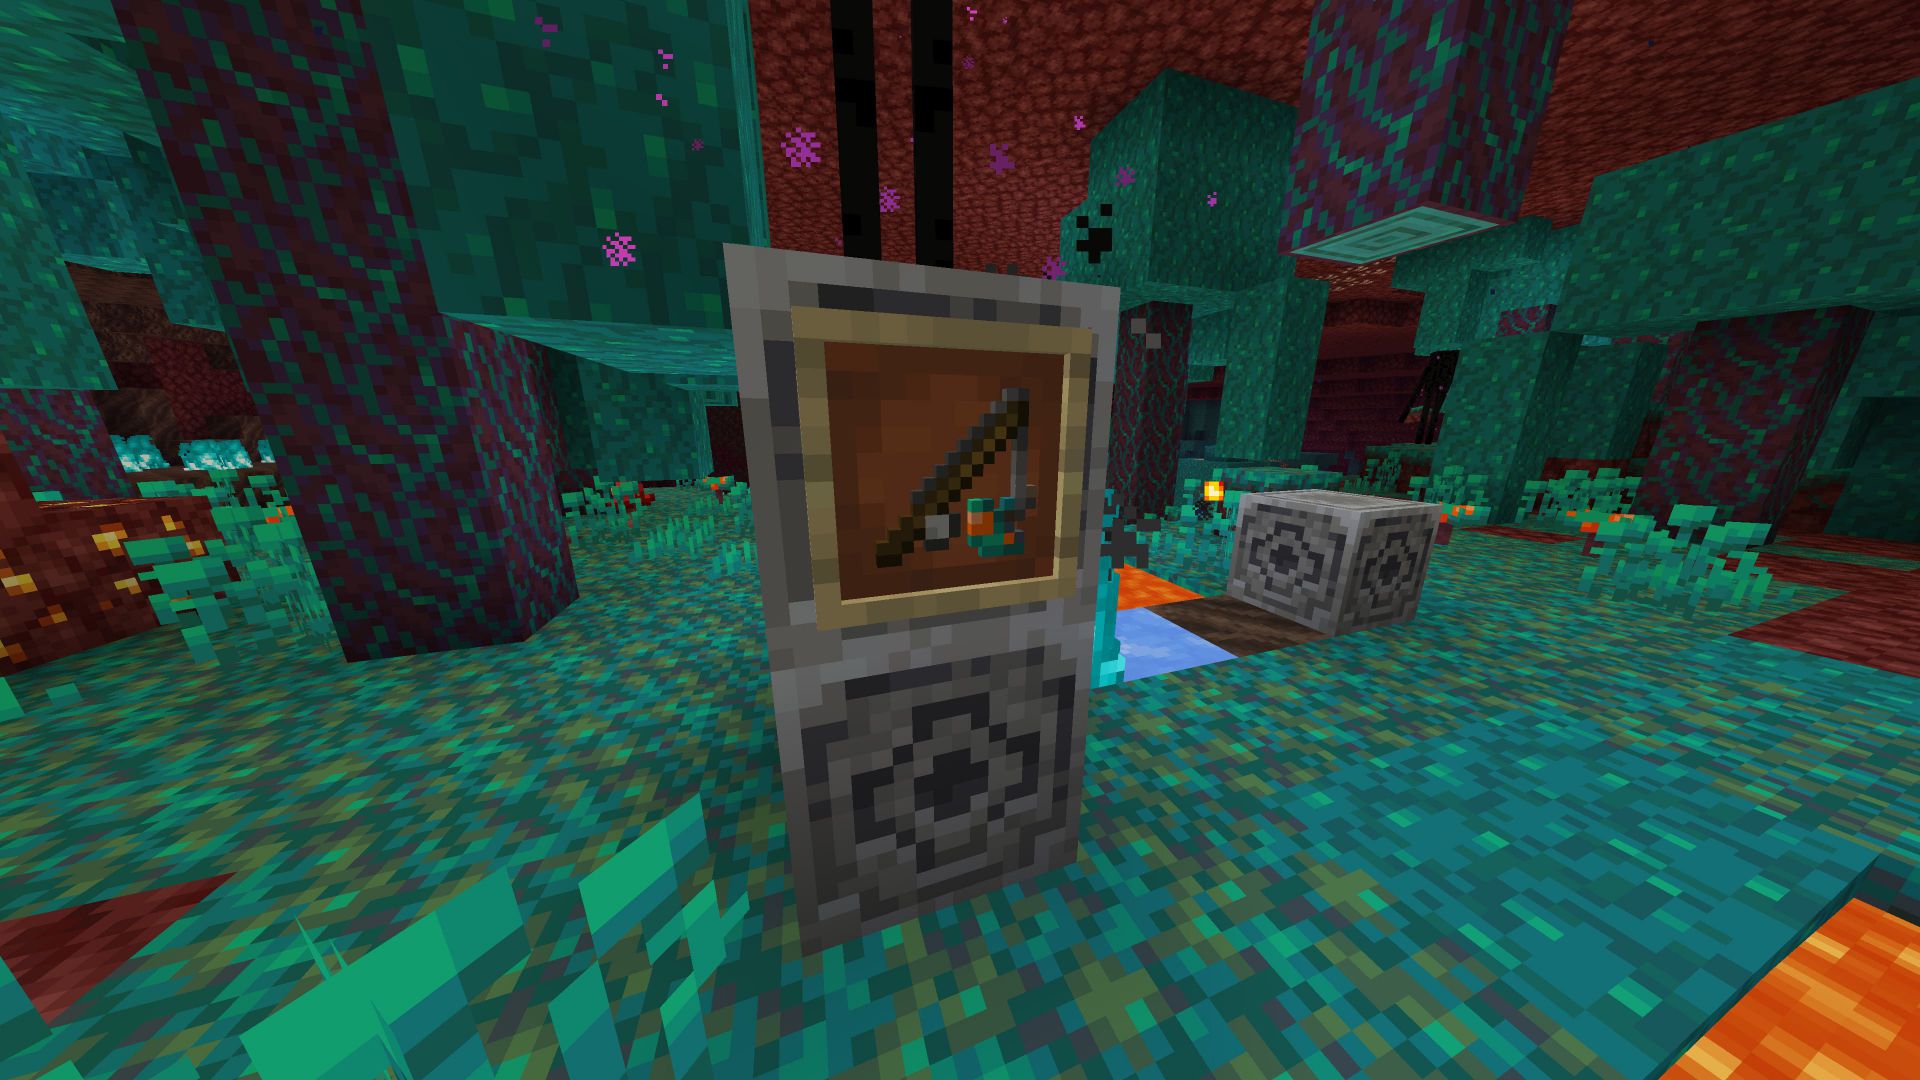 Mushrooms distorted in Minecraft 1.16 or nether Renew the fishing rod in Snapshot 20W14A